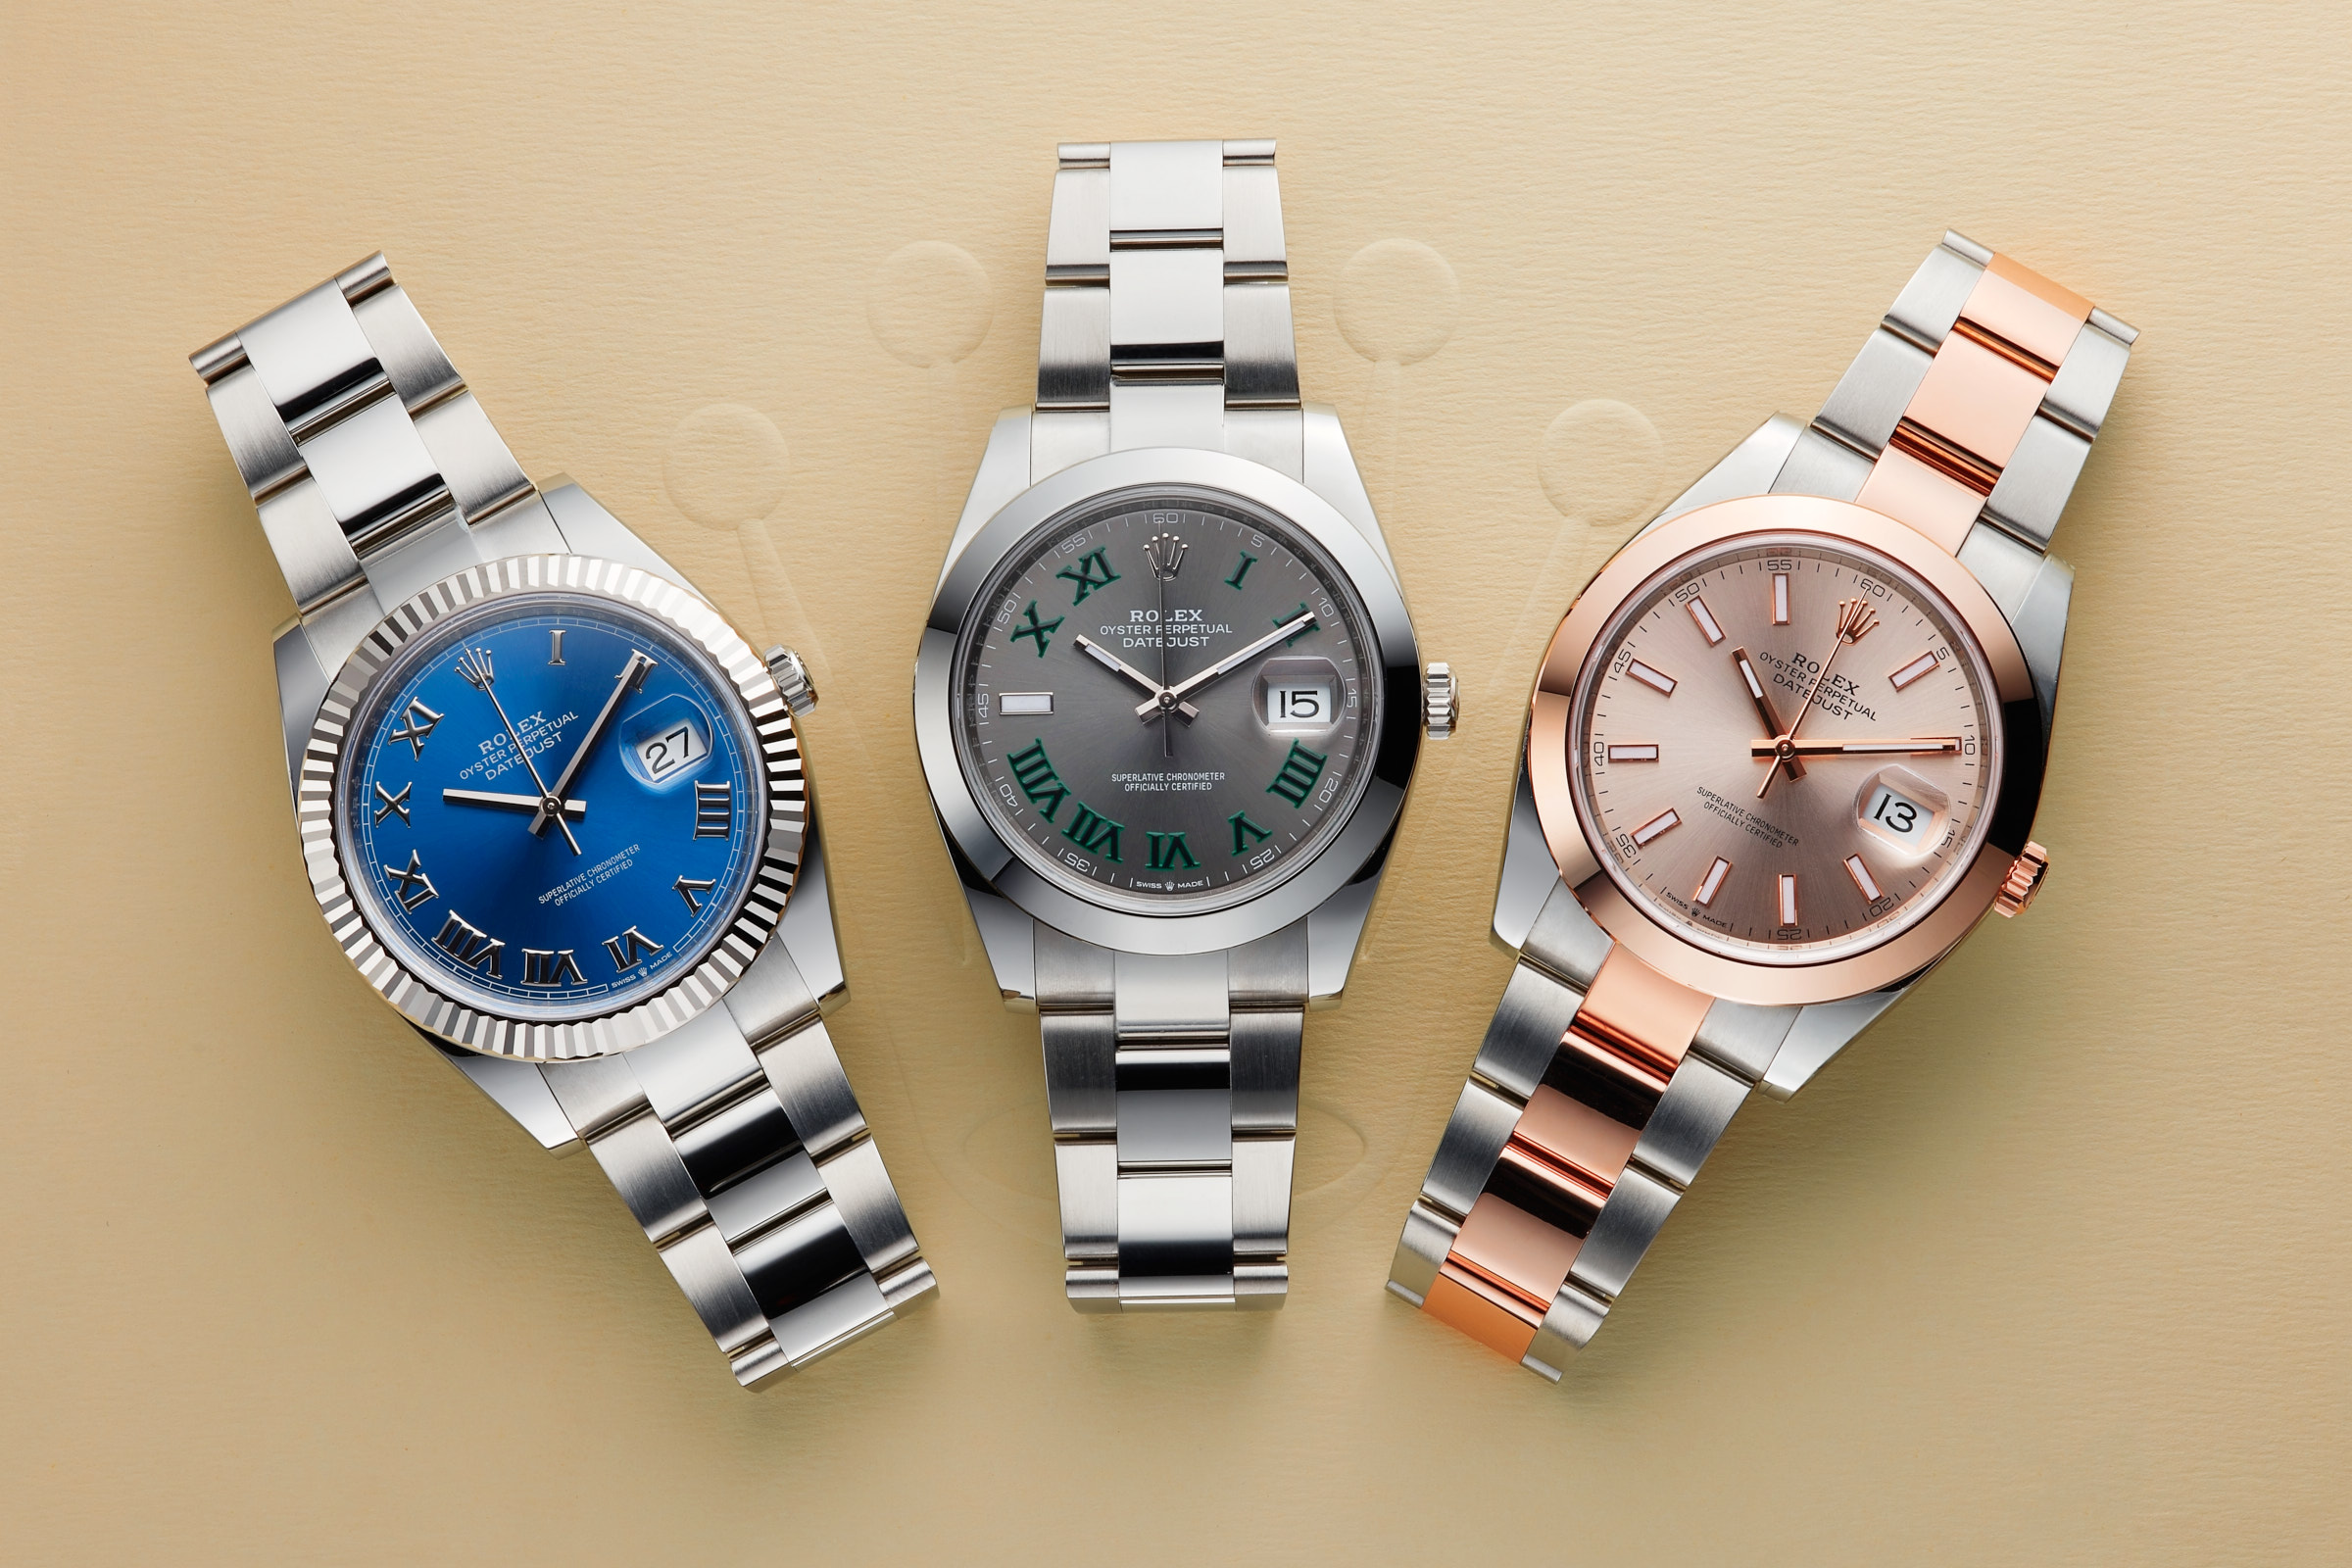 Rolex 126334, 126300, and 126301 on top of the Rolex Box cover with the Rolex logo.